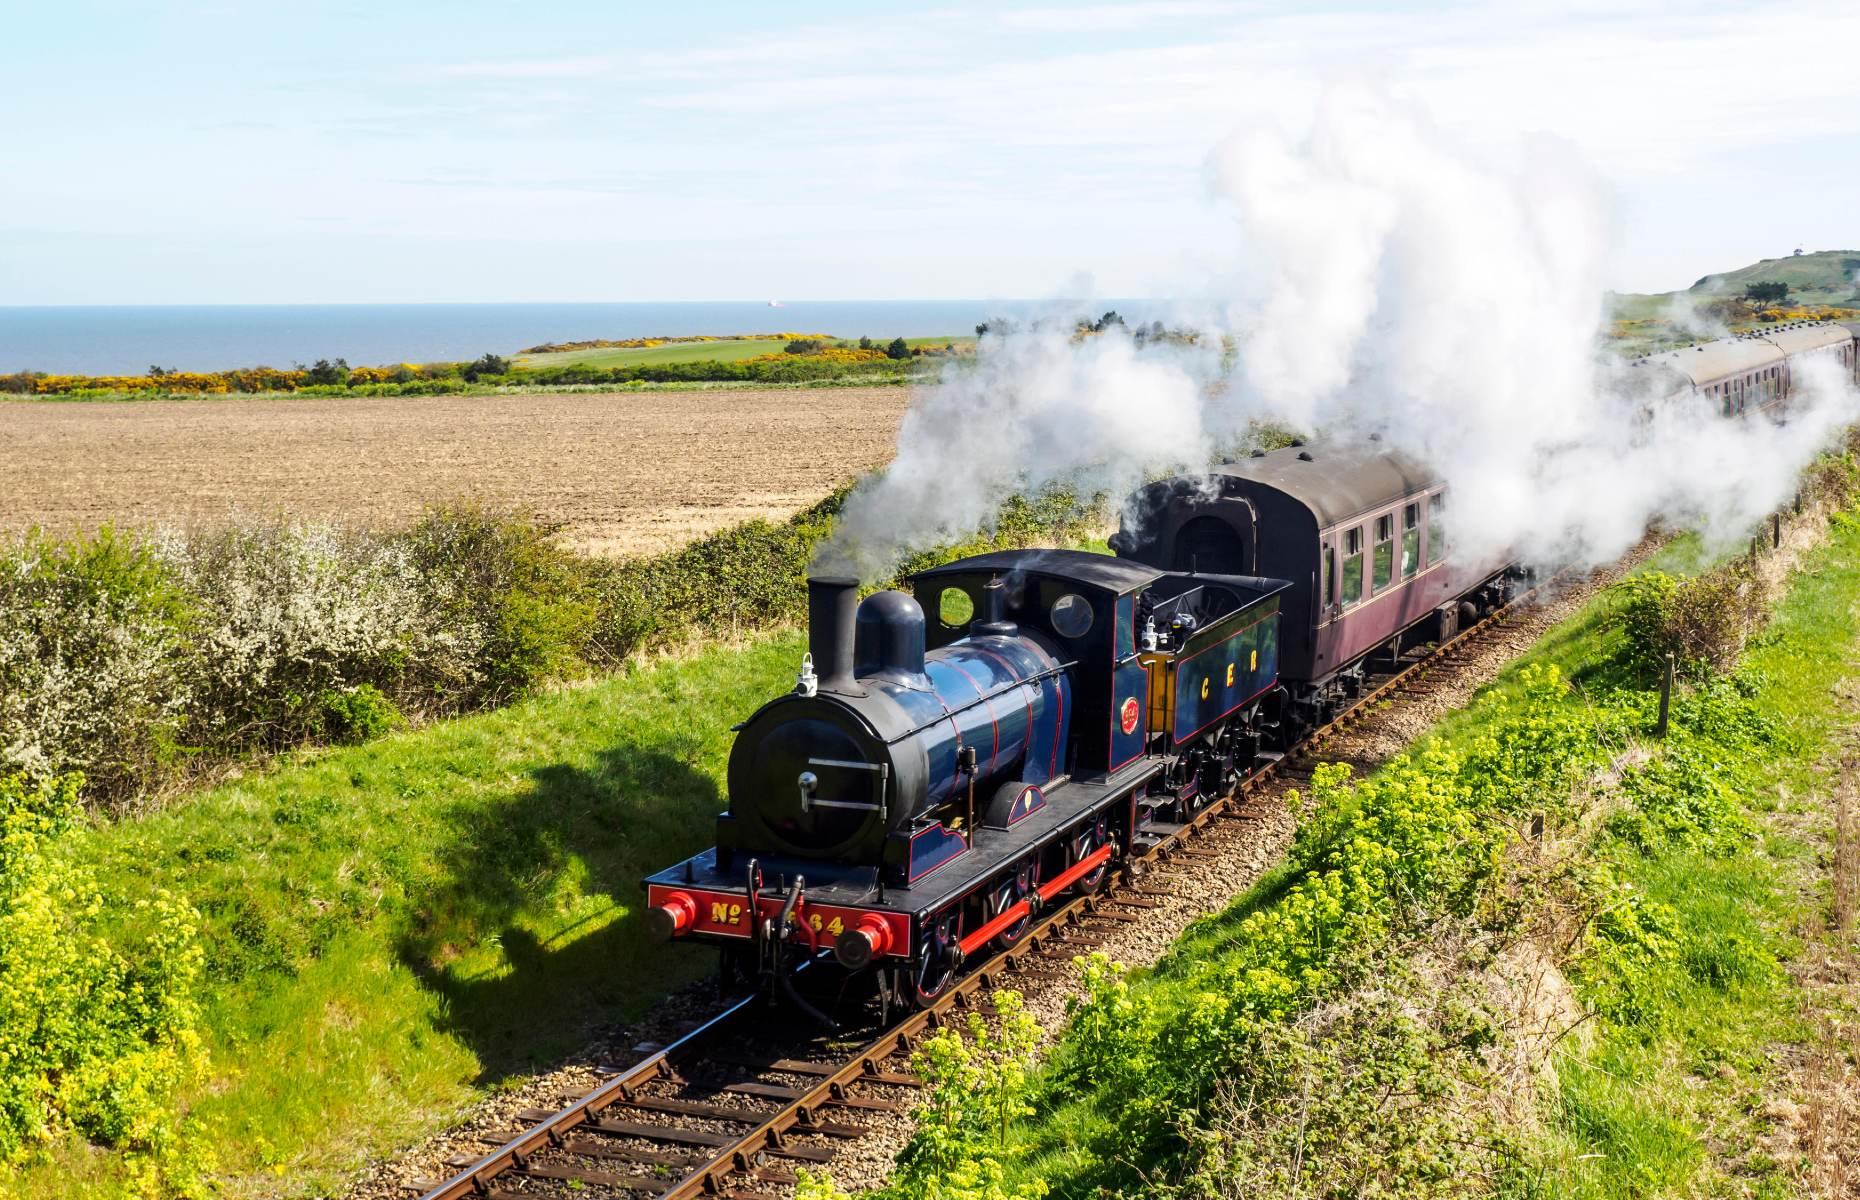 <p>Nicknamed the ‘Poppy Line’, the <a href="https://www.nnrailway.co.uk/">North Norfolk Railway</a> is one of the five great heritage lines of the UK. Operating since 1887, the railway travels for five-and-a-half miles (8.8km) taking in some of Norfolk’s prettiest sights. Steam locomotives whisk passengers from Sheringham past several Norfolk beauty spots including Kelling Heath and Sheringham Park, as it travels north towards the sea ending at the historic market town of Holt. The railway’s biggest draw are the beautiful primroses, bluebells and yellow gorse that dominate the landscape in early summer while swathes of the famous poppies appear later on in the year.</p>